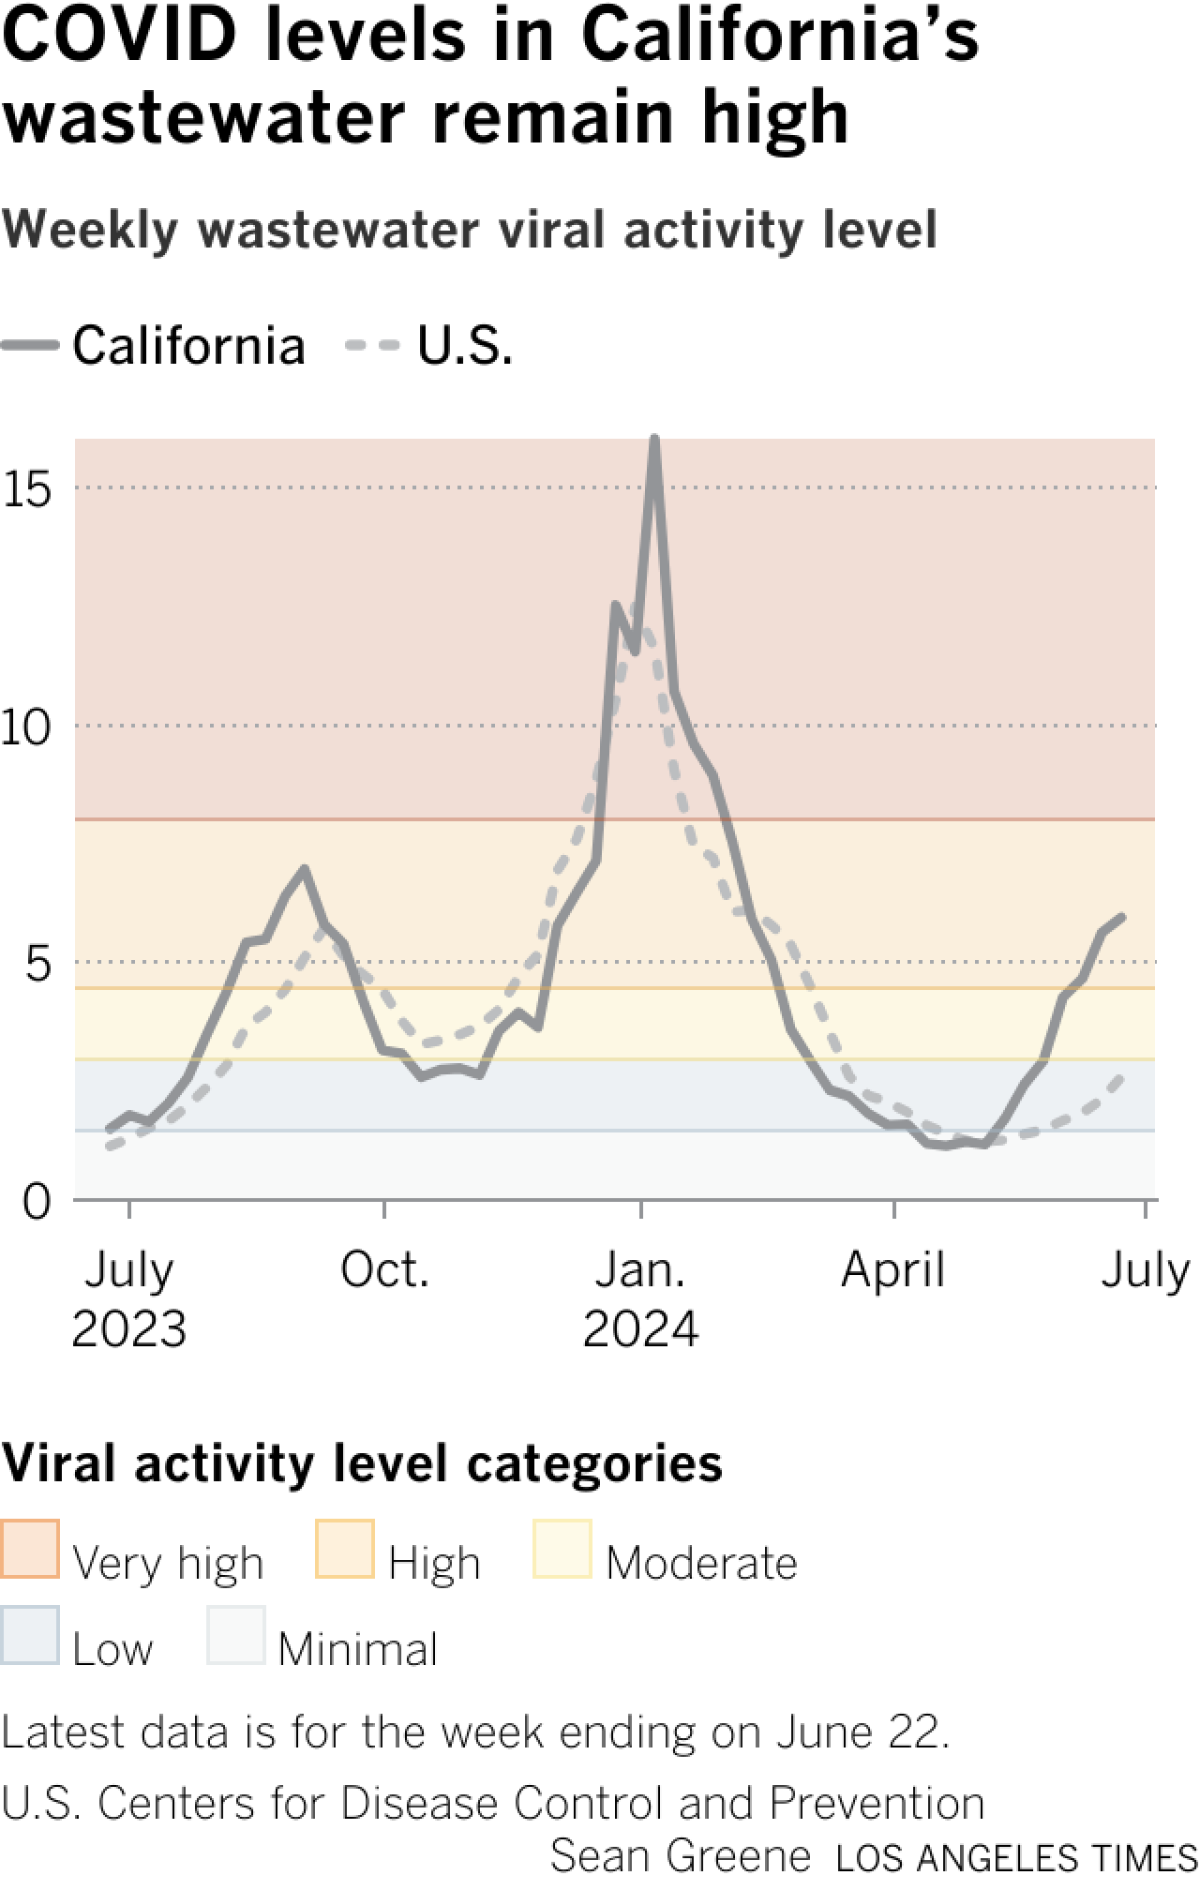 Line graph shows COVID levels in wastewater.  For the week ending June 22, the level in California is 5.94, considered high.  Nationally, the level is low at 2.59.